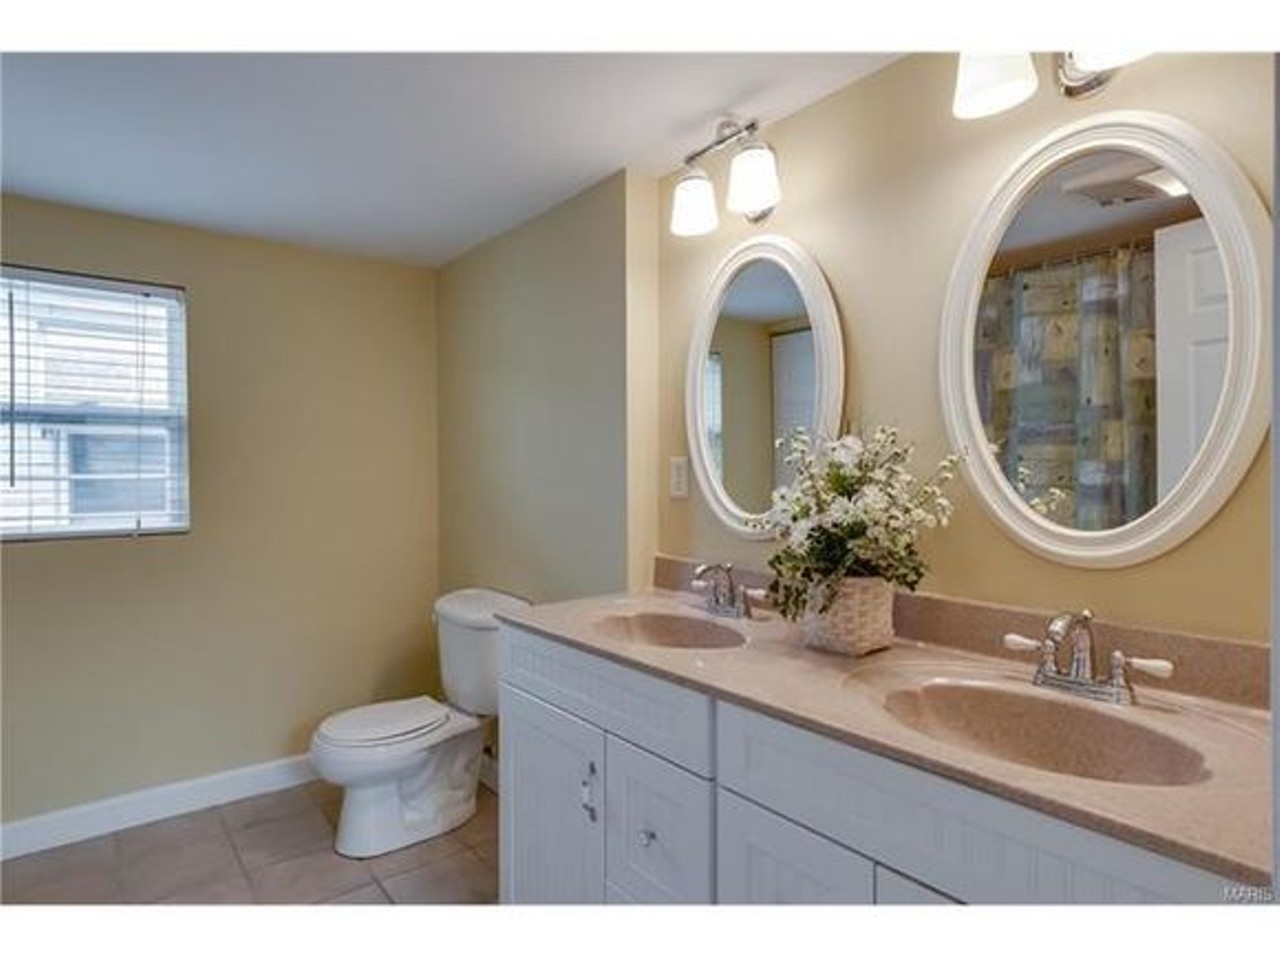 There is a full bath on the second floor as well. It has a double vanity and onyx counter-top.